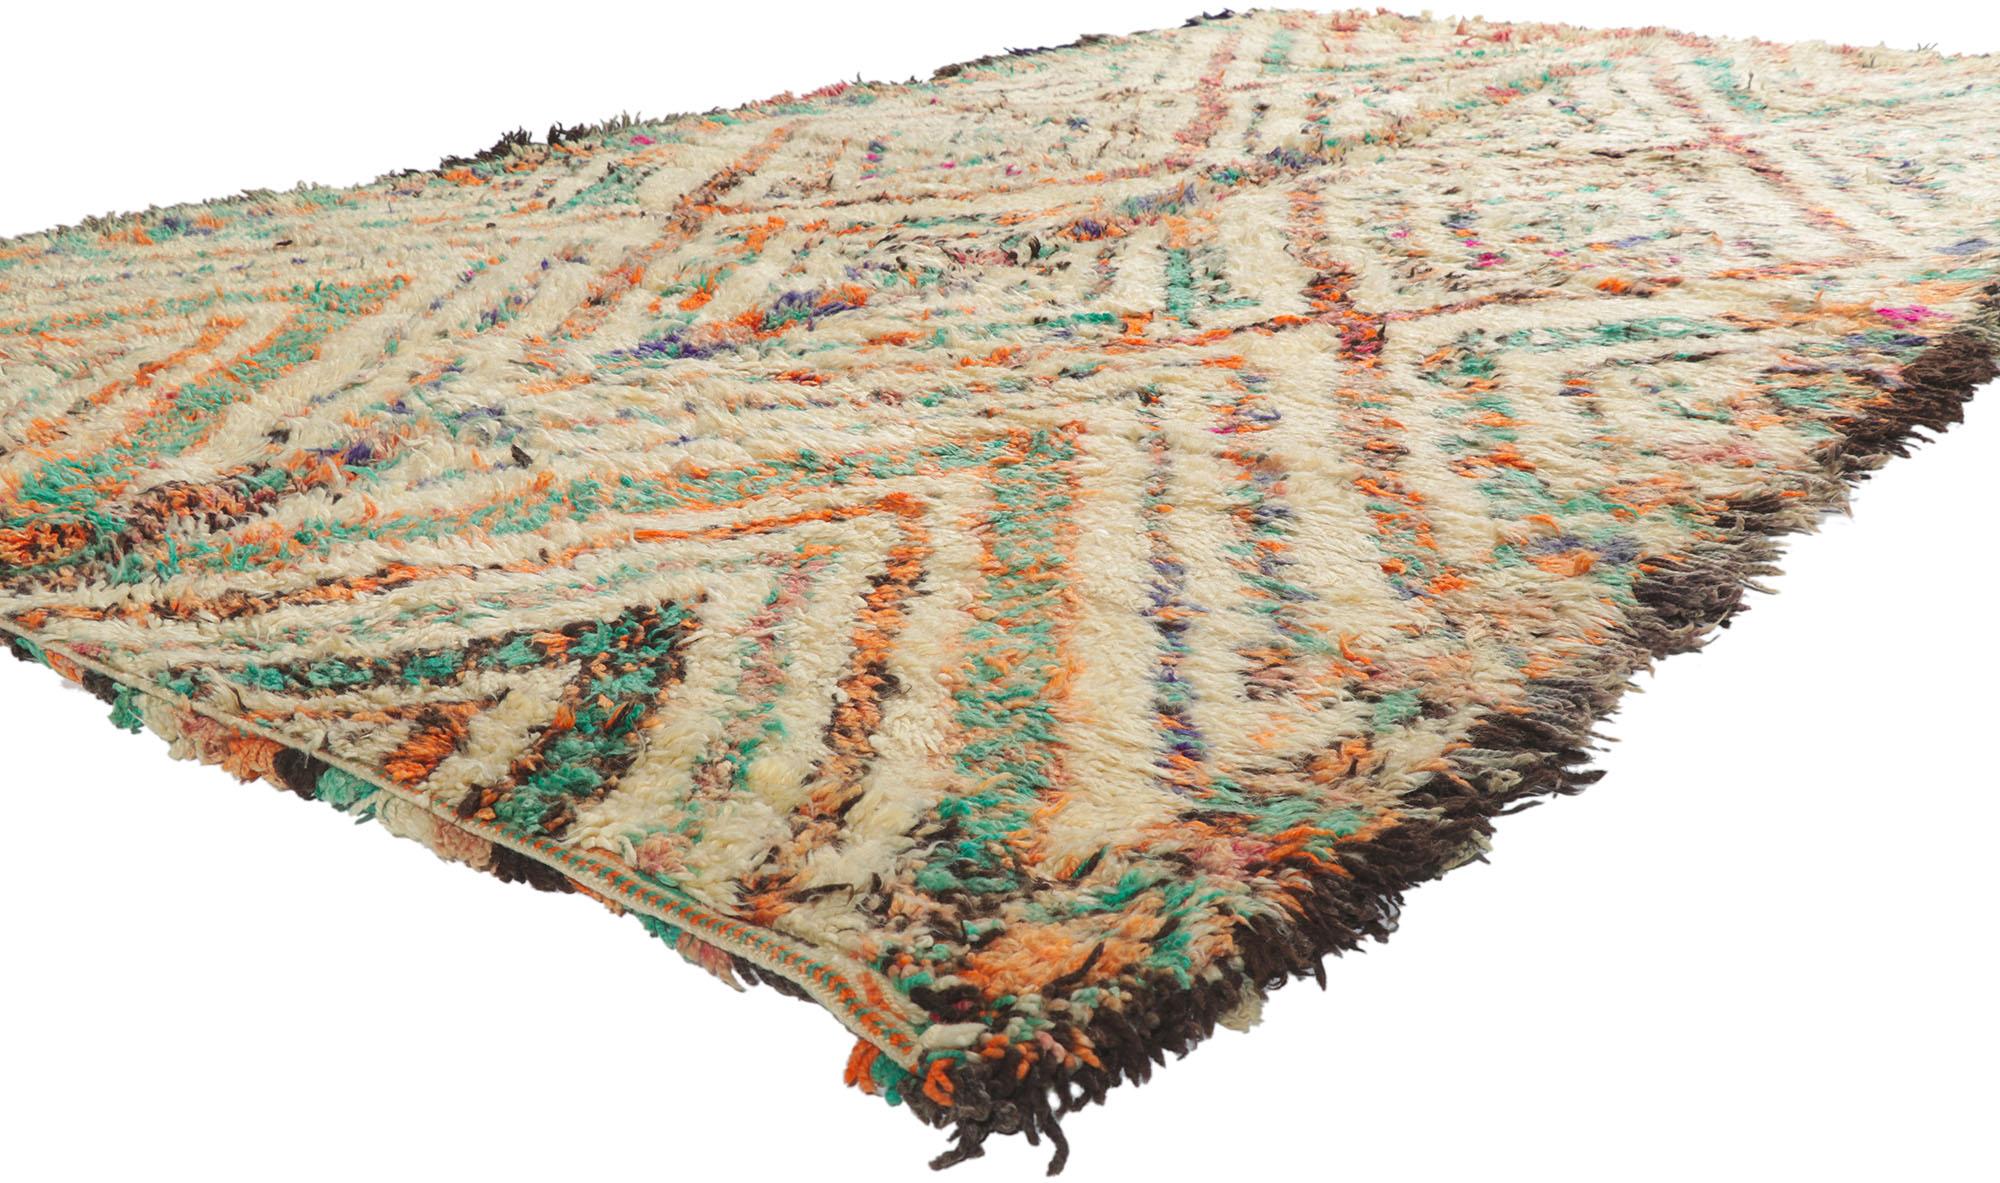 ?21404 Vintage Berber Moroccan Beni M'Guild Rug 06'06 x 11'08. ?With its diamond trellis, incredible detail and texture, this hand knotted vintage Berber Moroccan Beni Ourain rug is a captivating vision of woven beauty. The eye-catching diamond